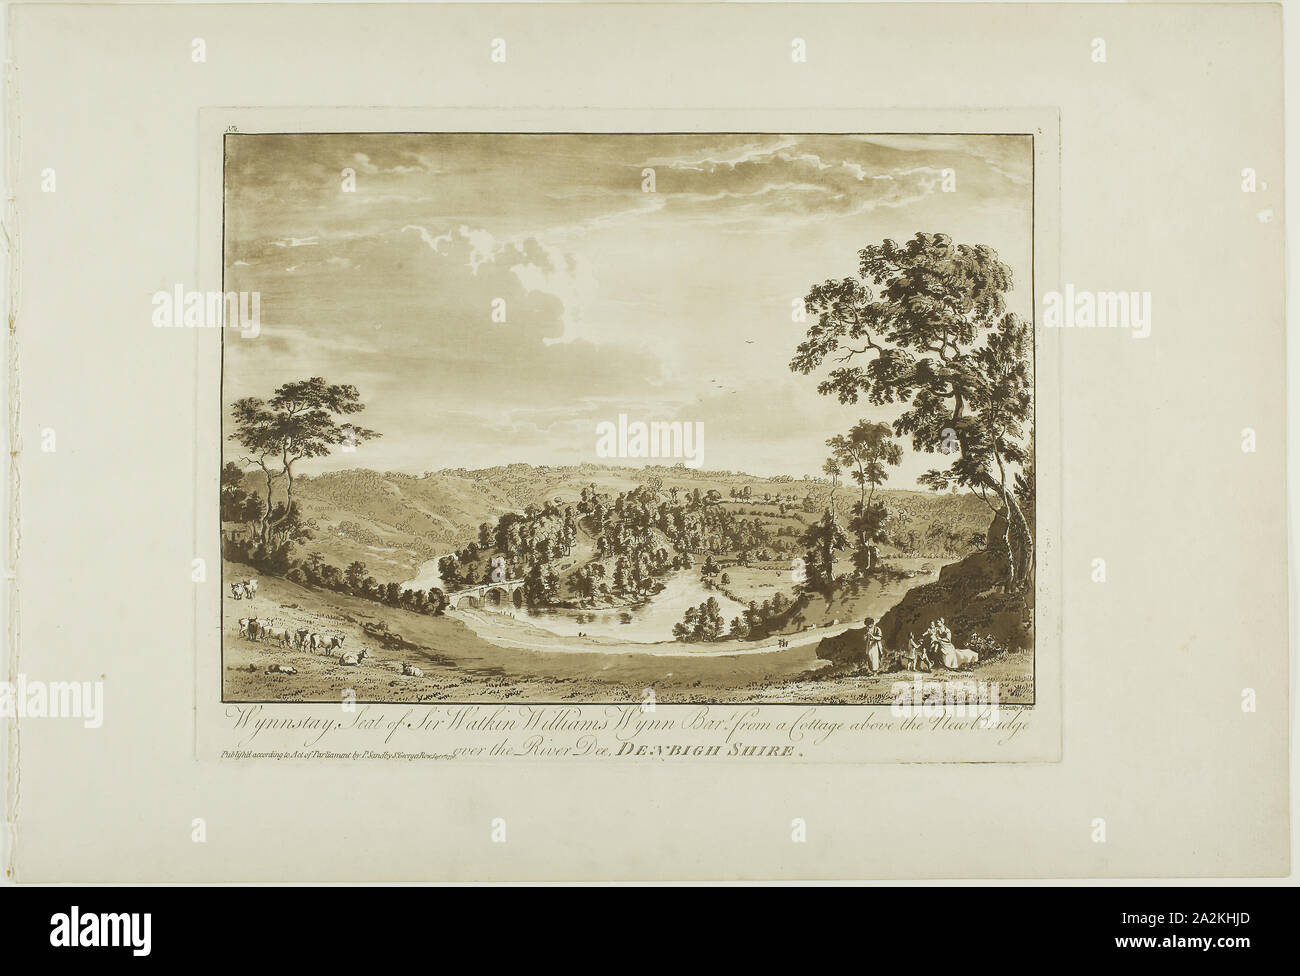 Wynnstay, Seat of Sir Watkin Williams Wynn Bart from a Cottage above the New Bridge over the River Dee, Denbigh Shire, 1776, Paul Sandby, English, 1731-1809, England, Etching and aquatint in sanguine on ivory laid paper, 239 × 315 mm (plate), 320 × 463 mm (sheet Stock Photo